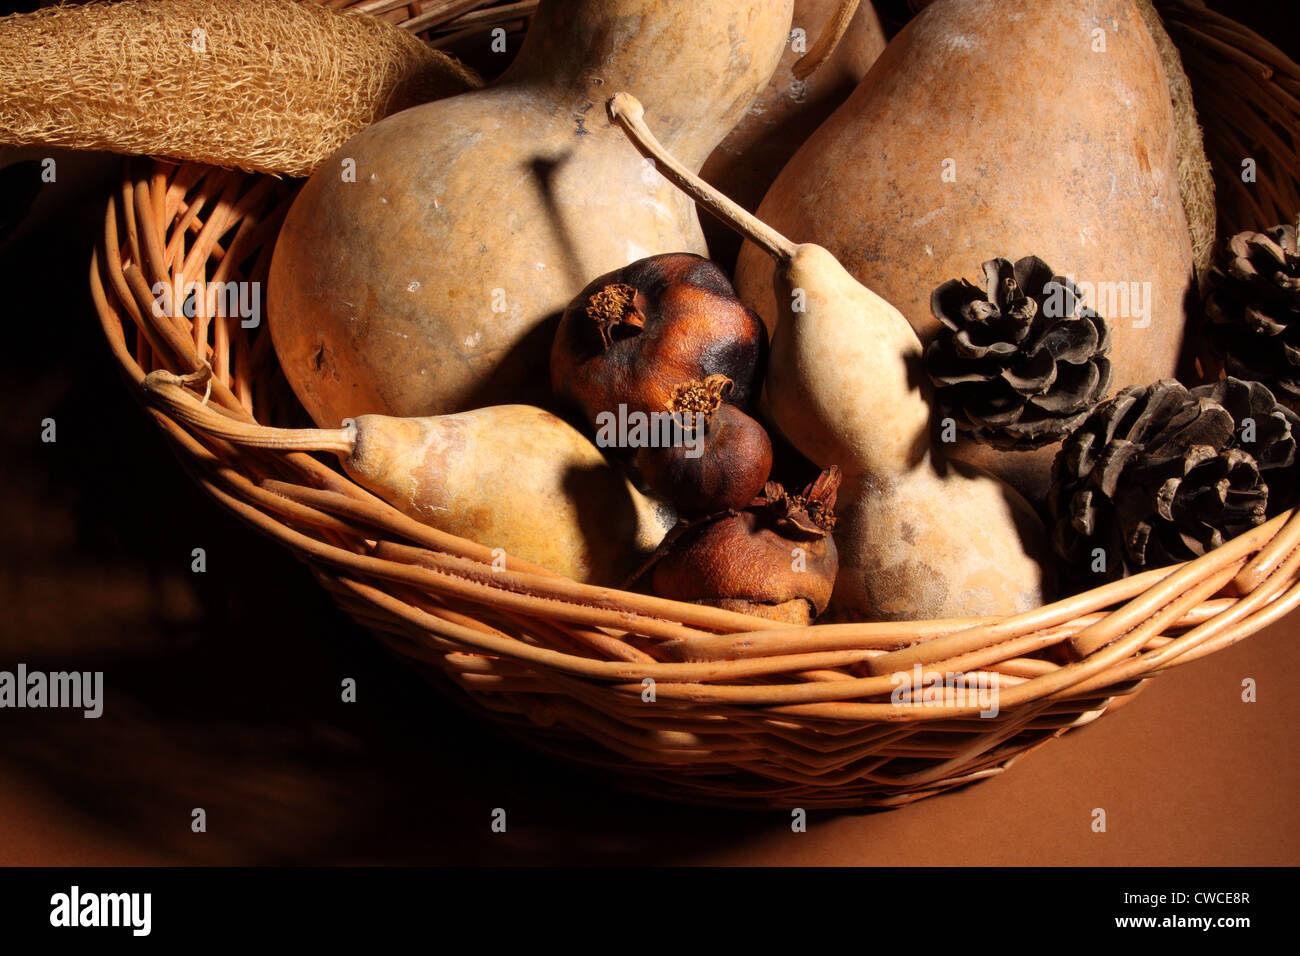 A dry rot cucurbit and some Seasonal nuts in a basketry. Stock Photo